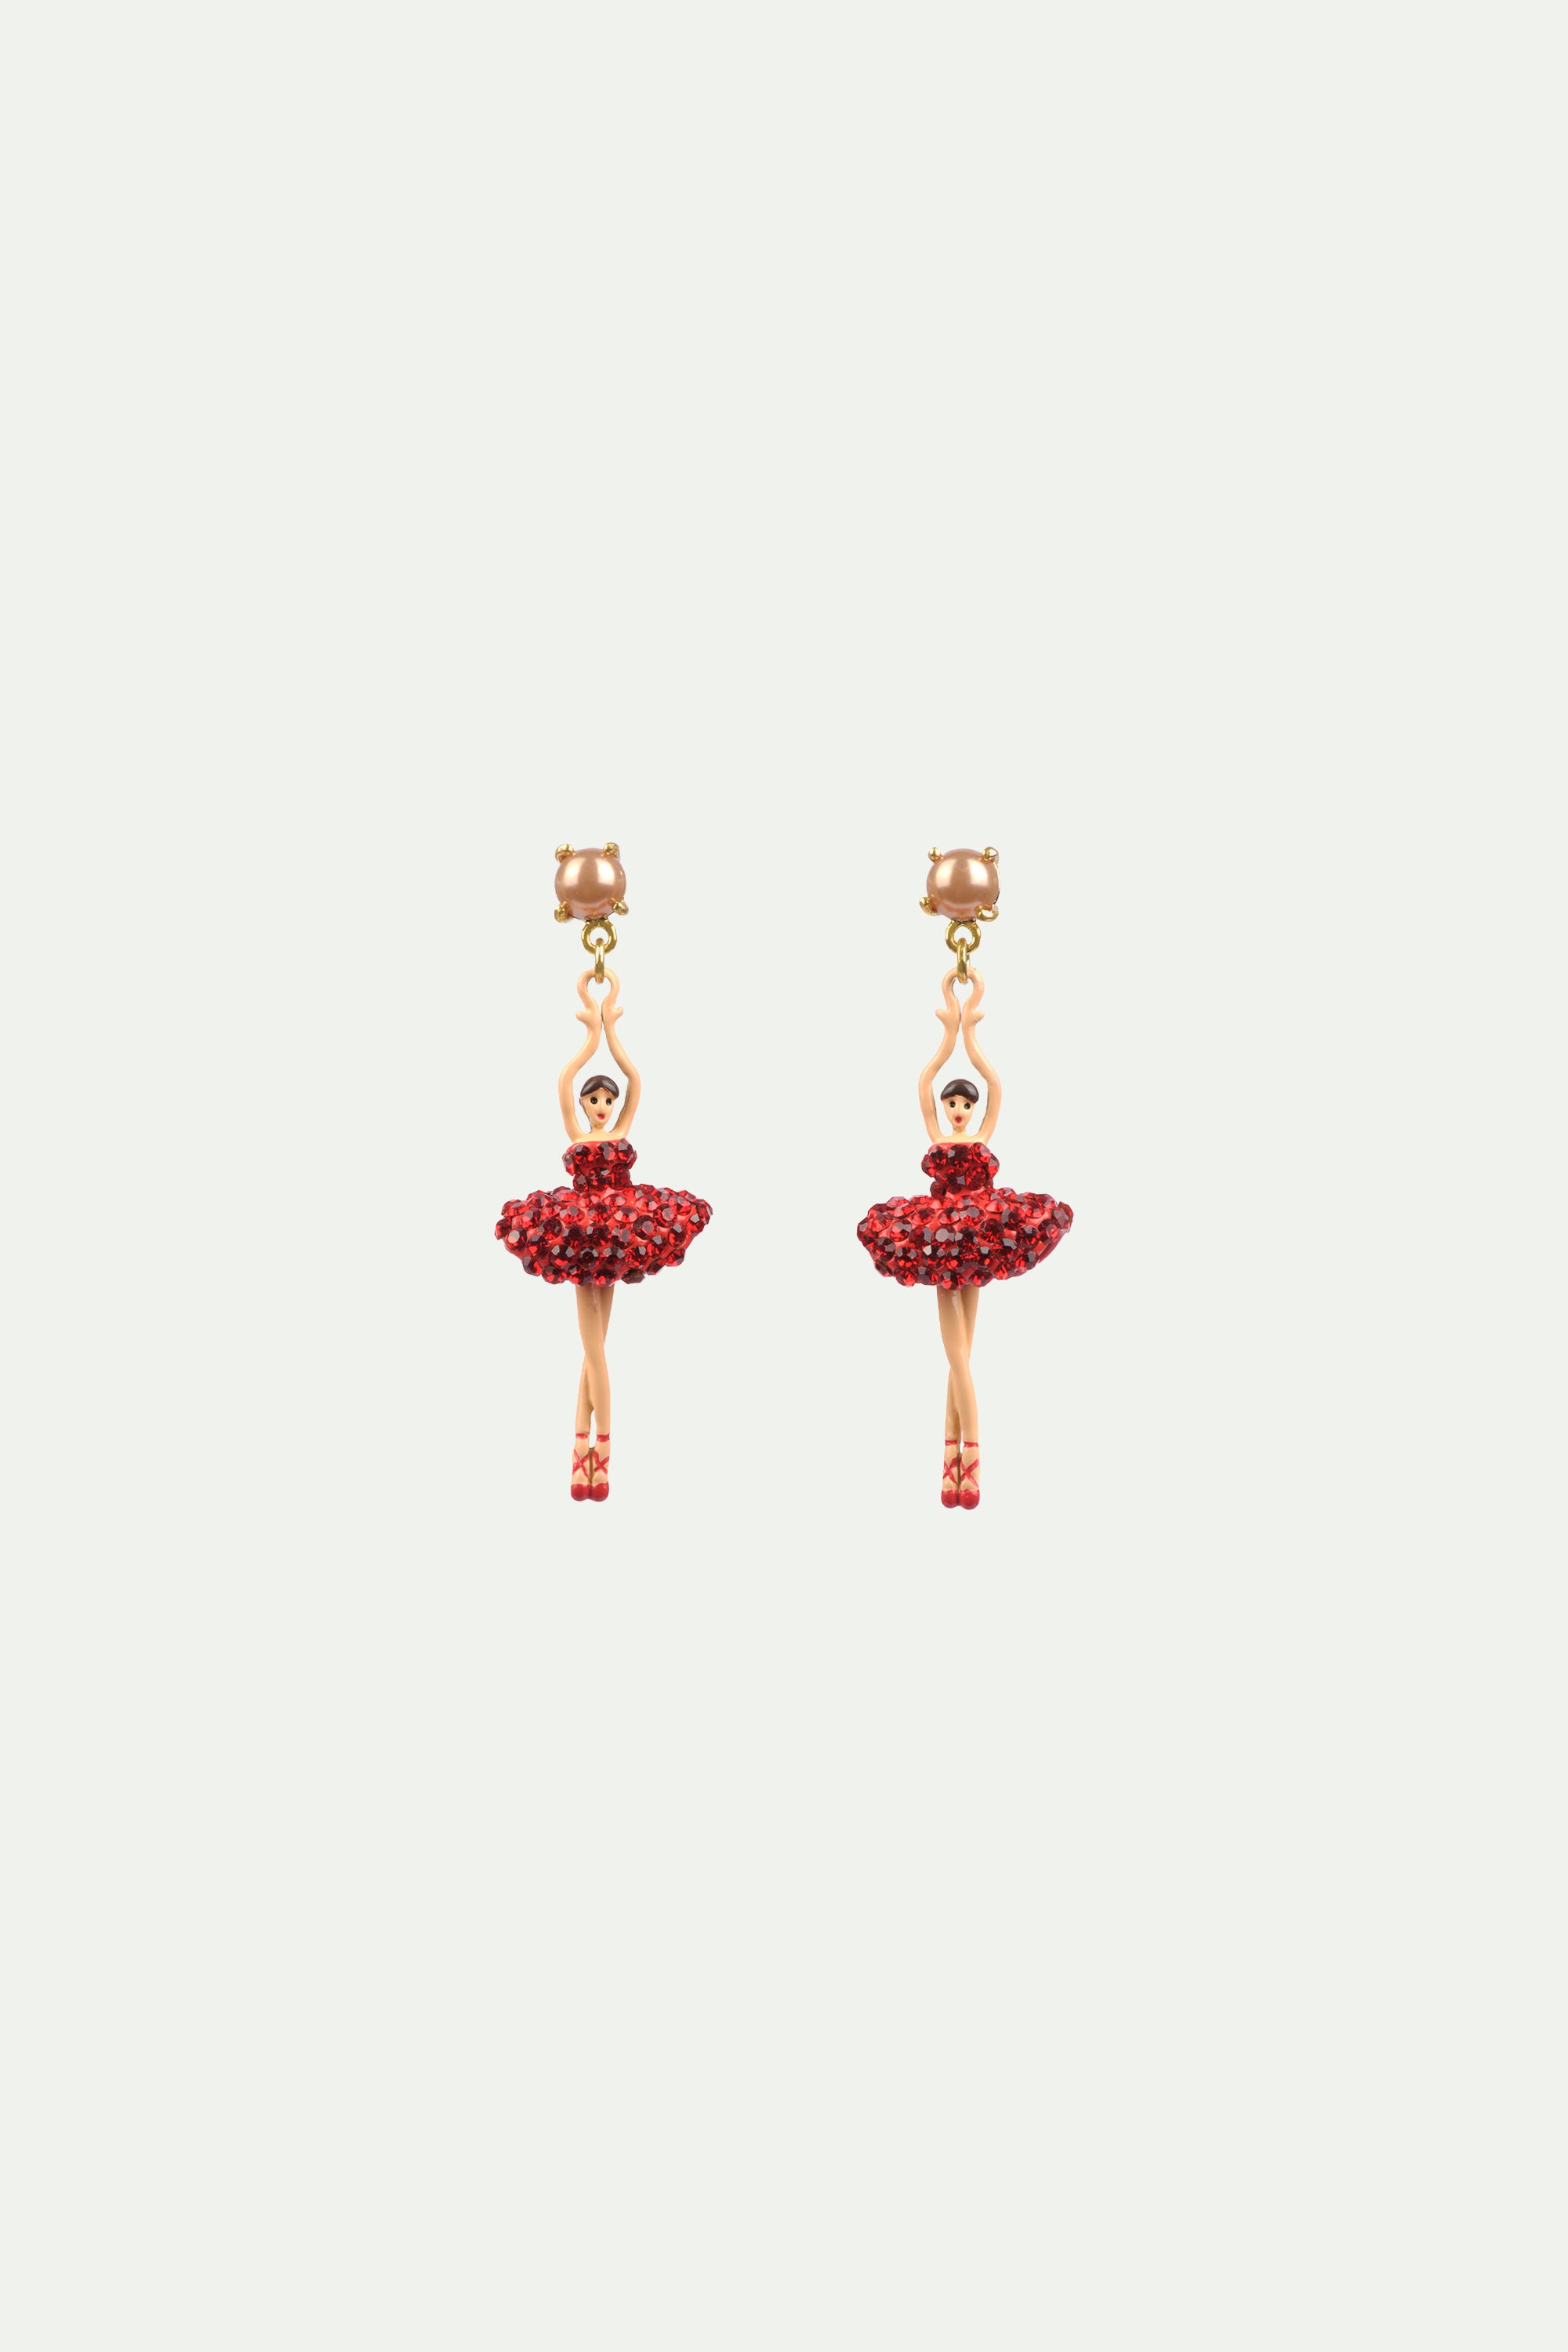 Clip on earrings toe-dancing ballerina with tutu paved with red rhinestones